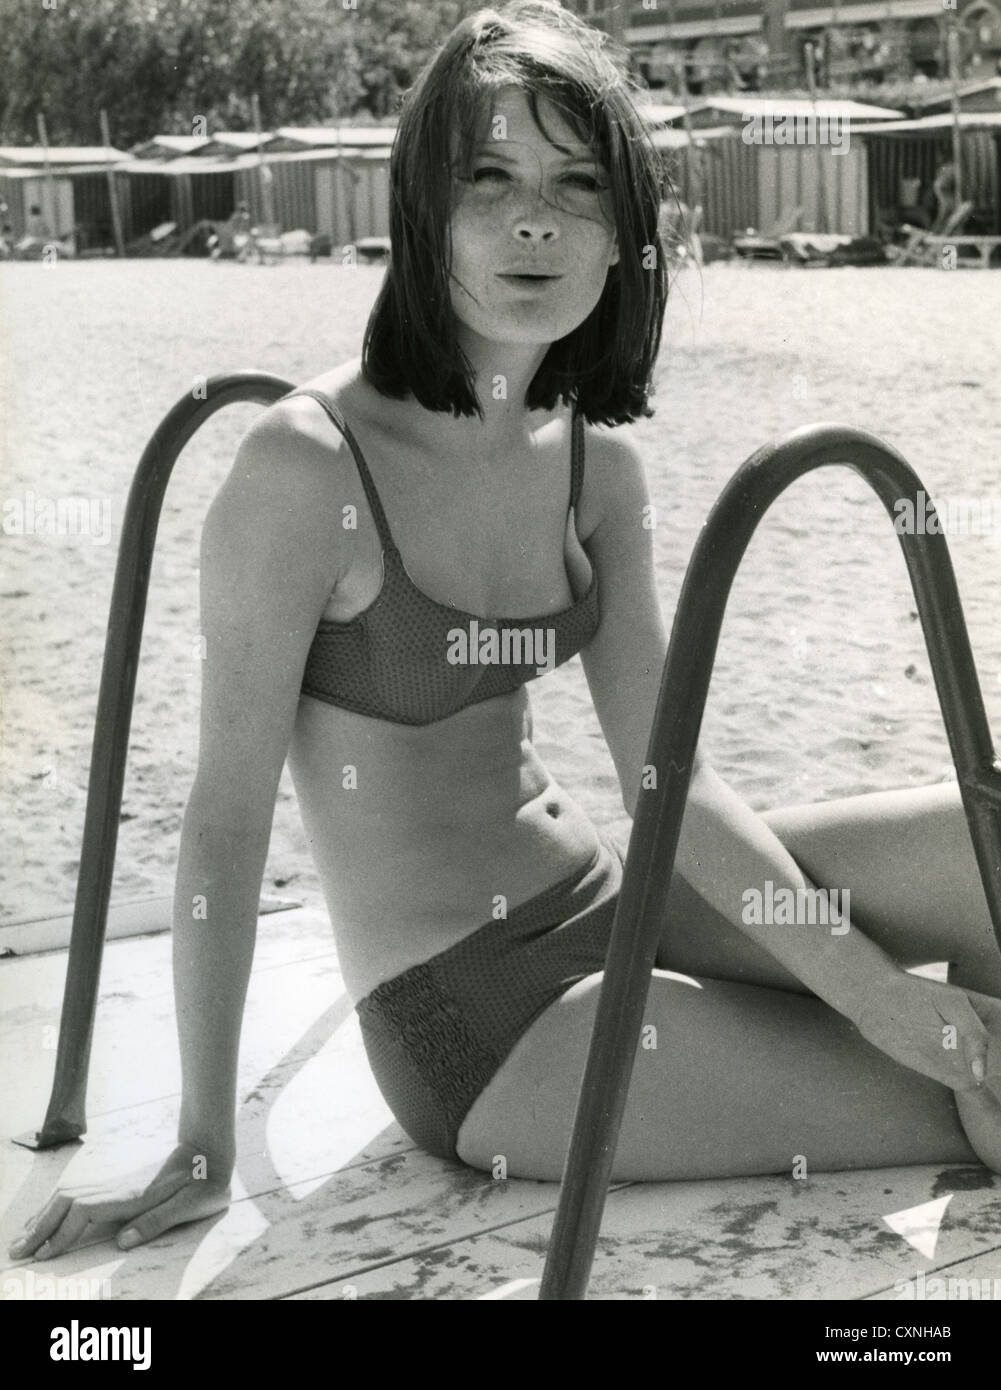 Sandie Shaw Uk Pop Singer In San Remo In 1967 For The Eurovision Song Contest Which She Won With